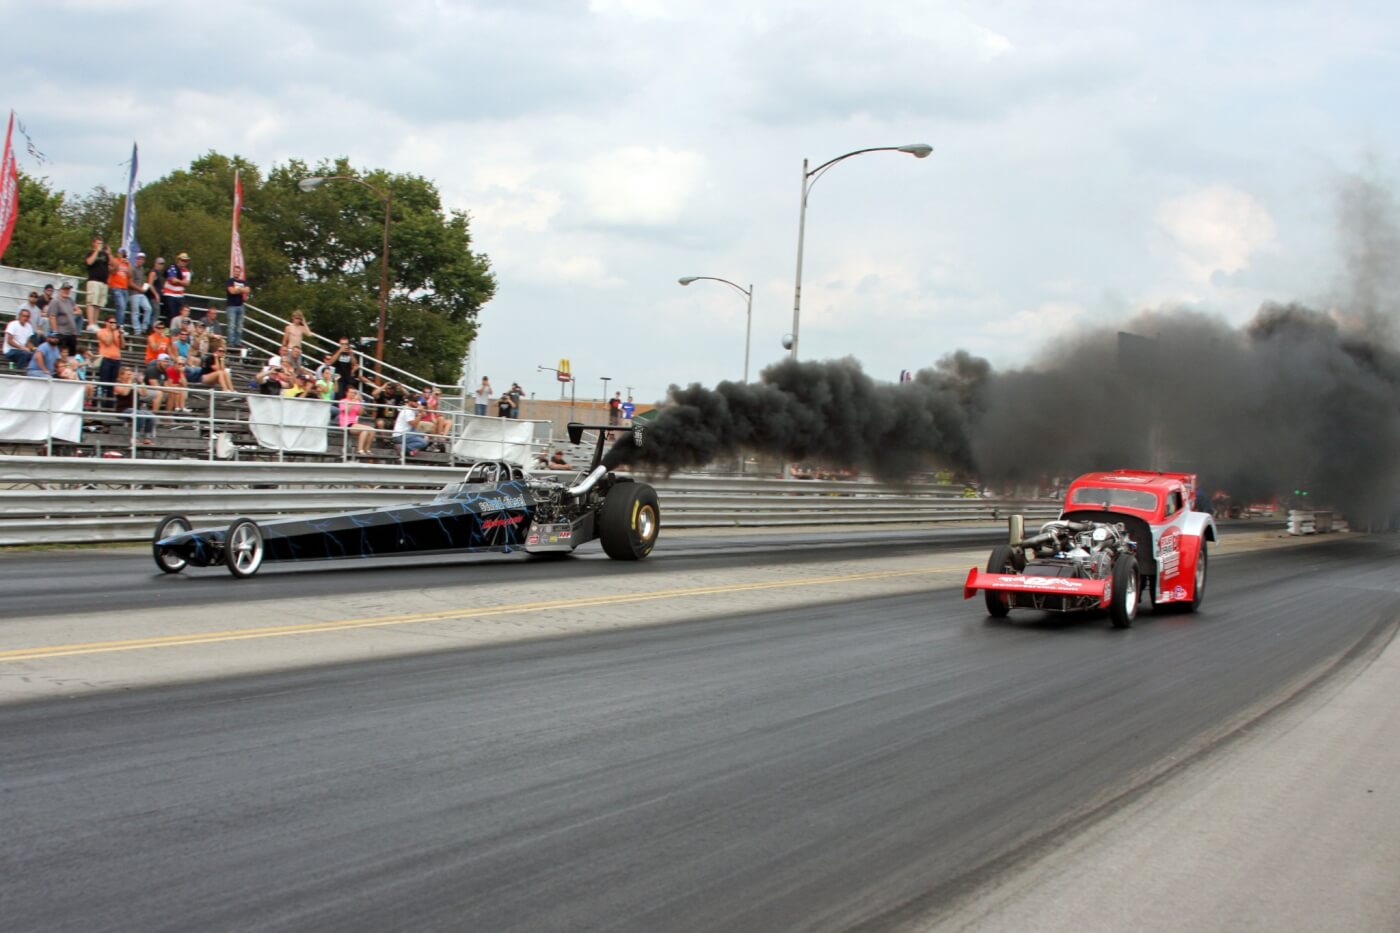 The final round of Pro Dragster Sunday was a familiar sight with John Robinson (near lane) lining up against Jarod Jones. Jones and the Scheid dragster pulled off the win with a mid 4-second pass at nearly 160 mph.